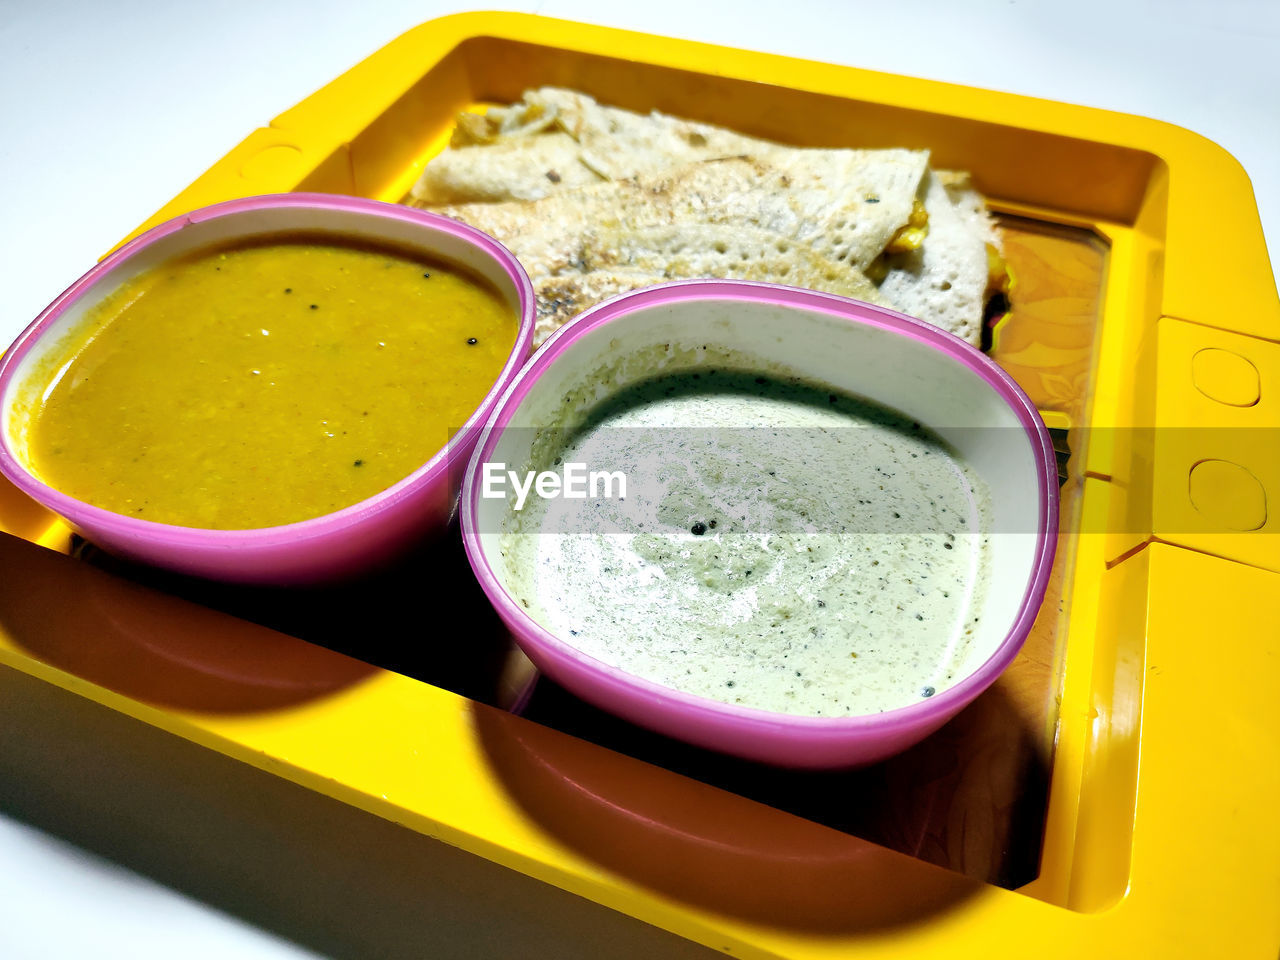 Masala dosa with sambhar and chutney, very famous south indian dish. top view selective focus